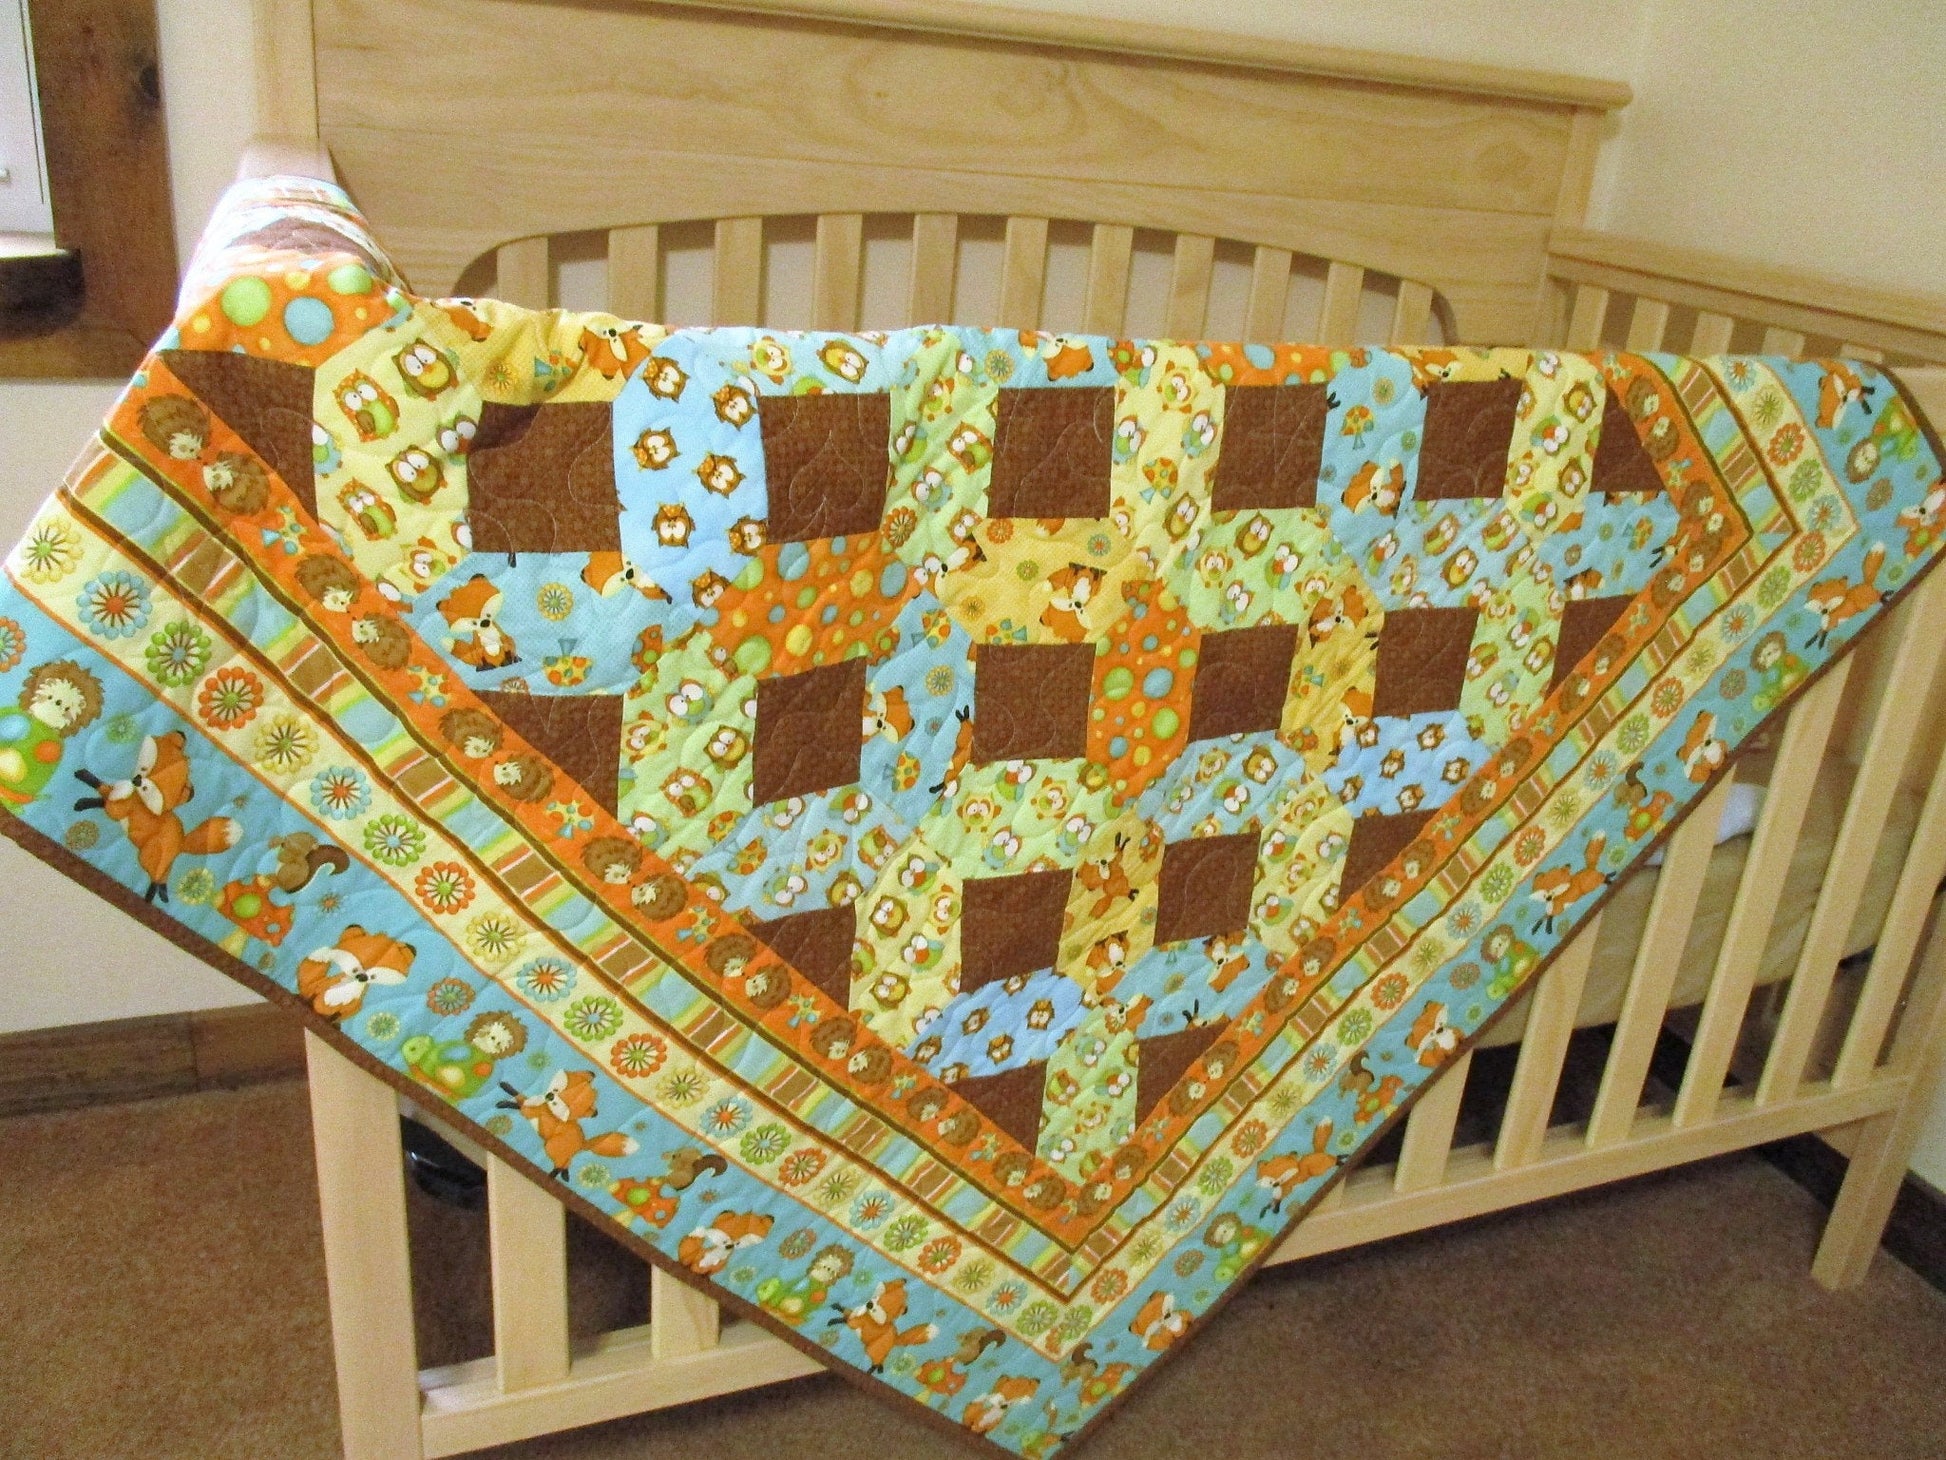 showing the woodland quilt draped over the side of a crib, showing scale